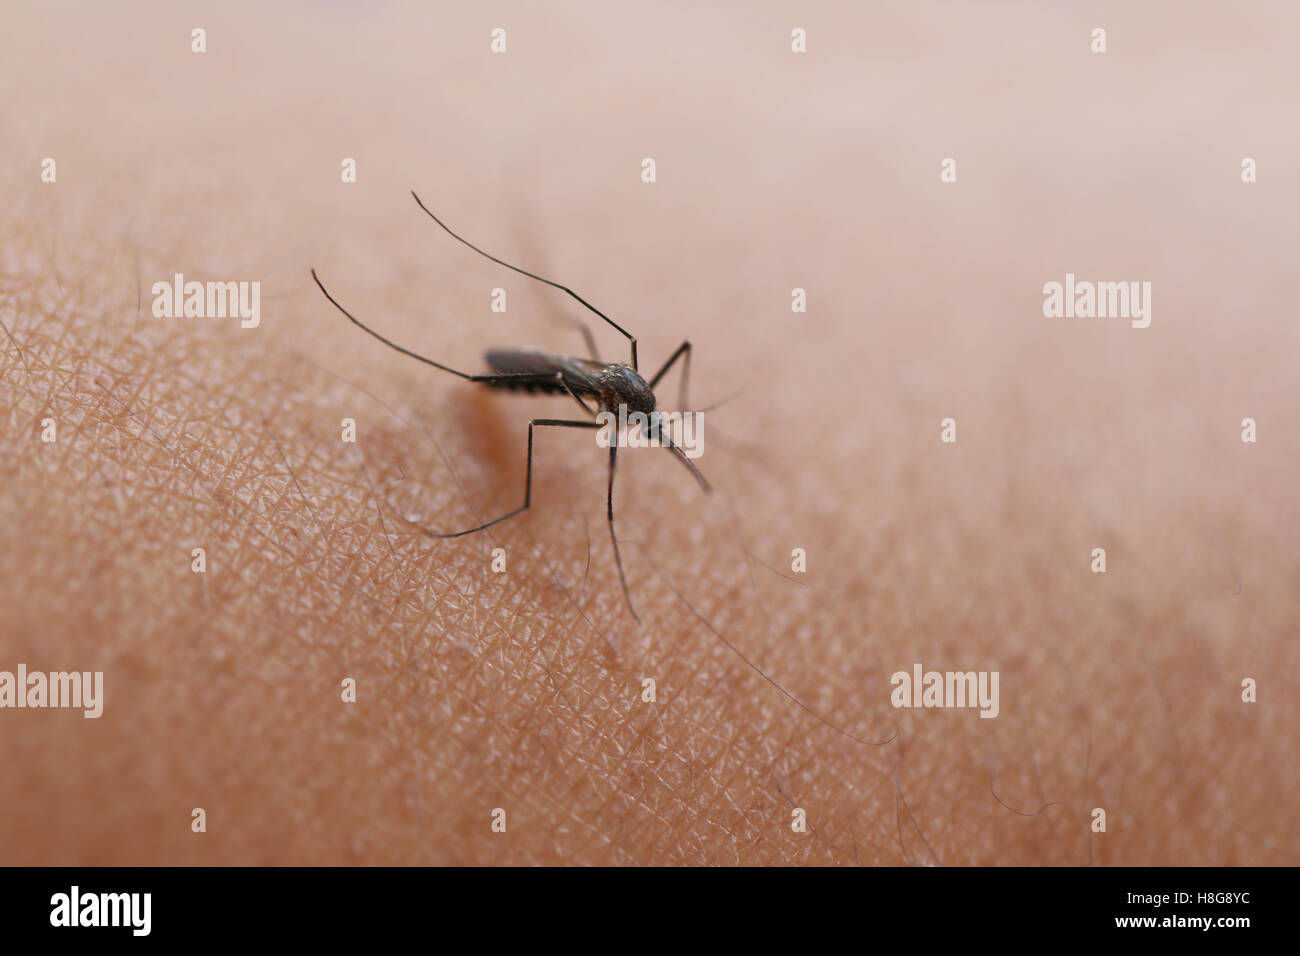 Mosquito sucking blood on the arm,concept of health and dengue fever. Stock Photo